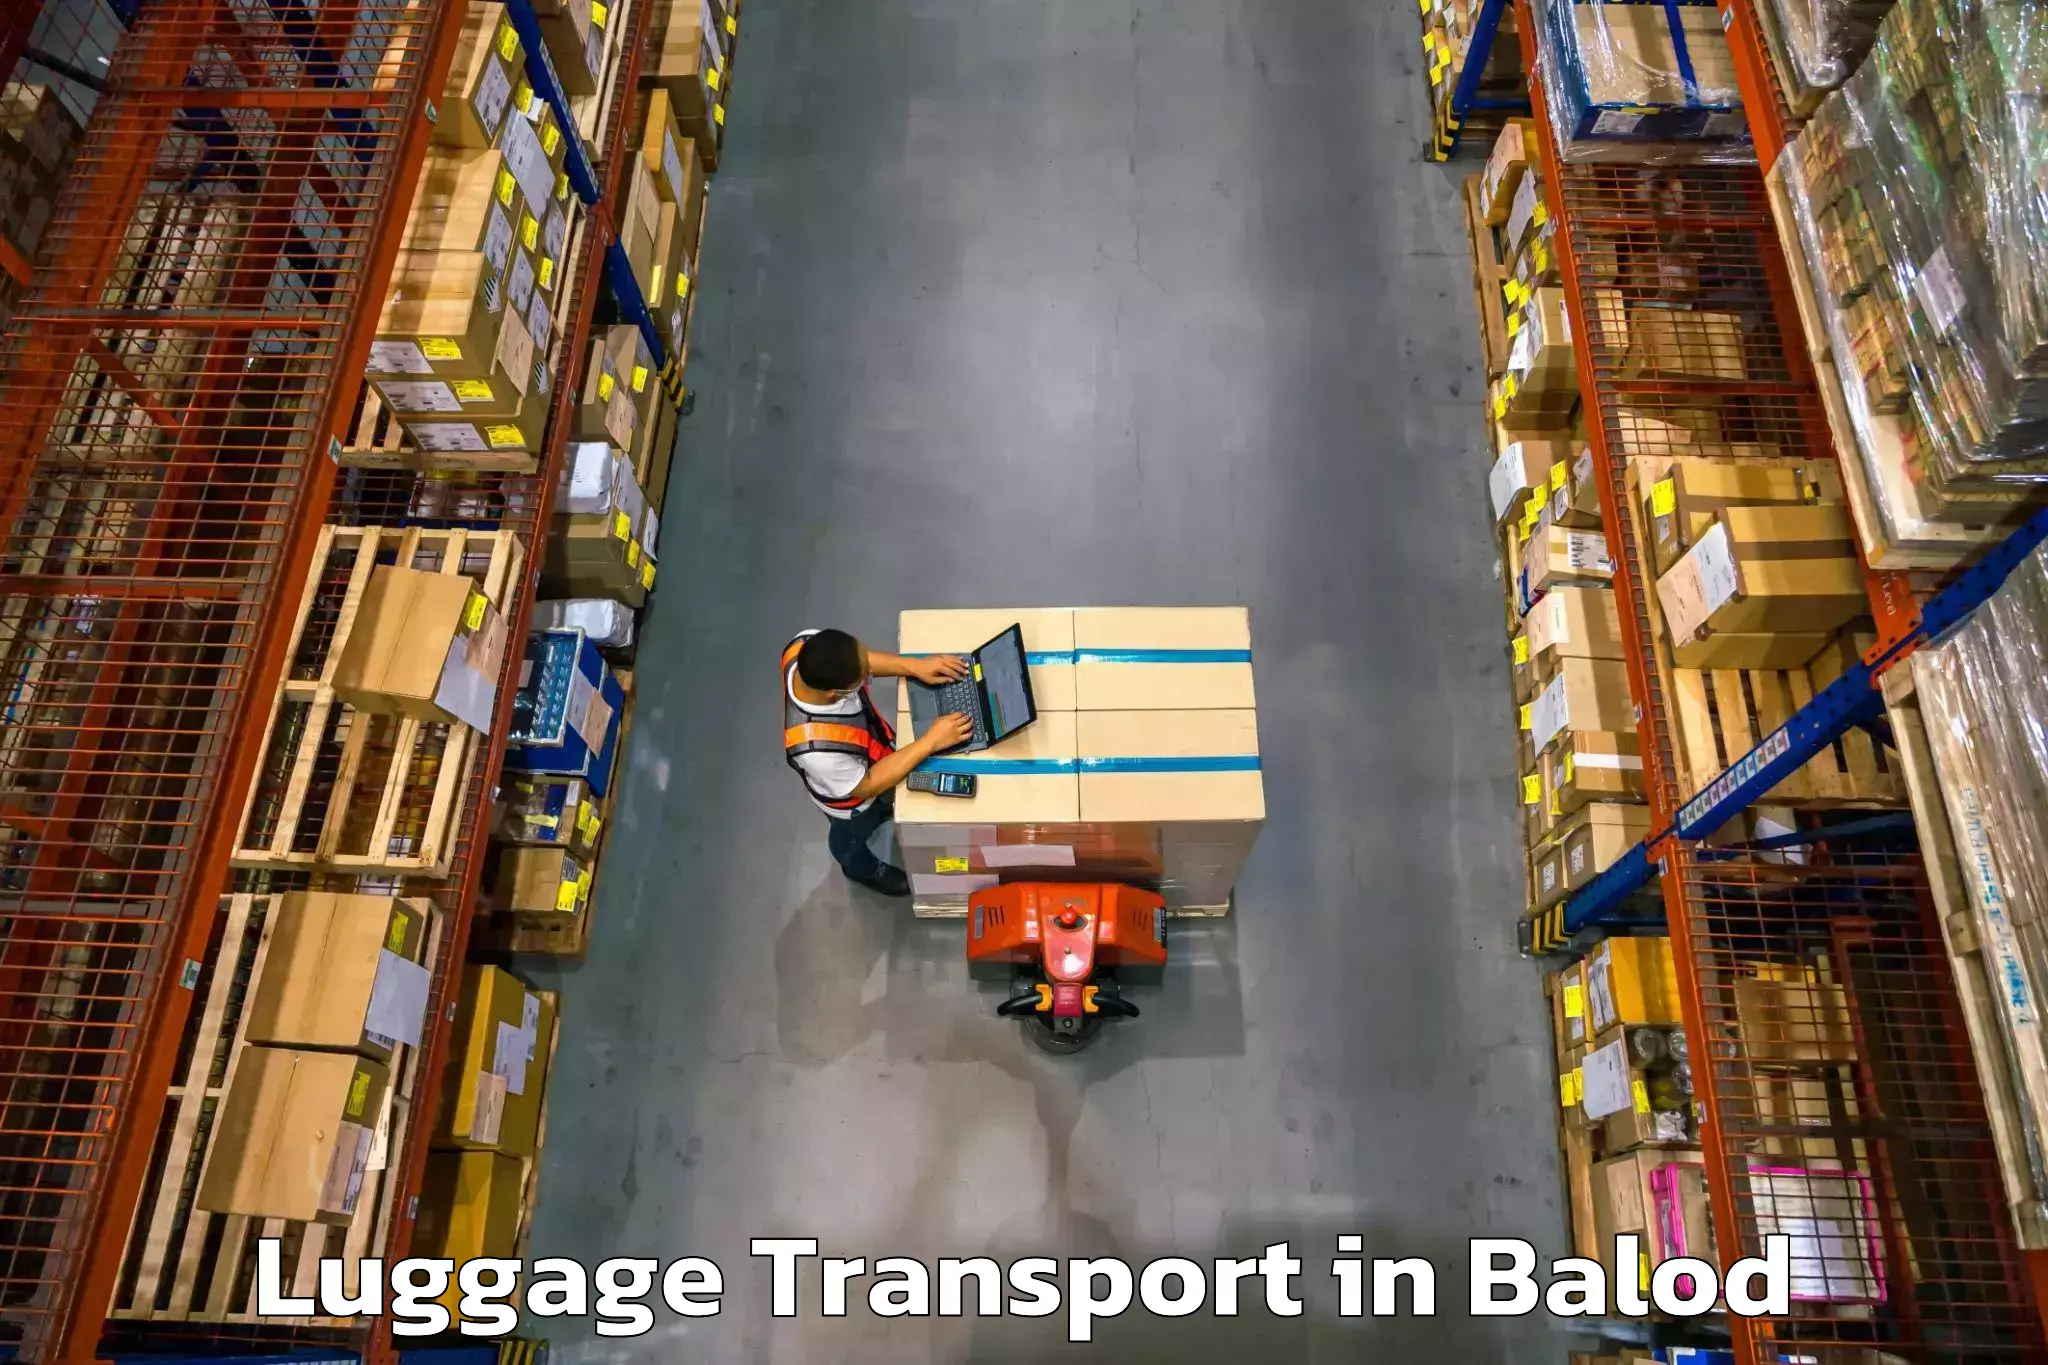 Baggage transport technology in Balod